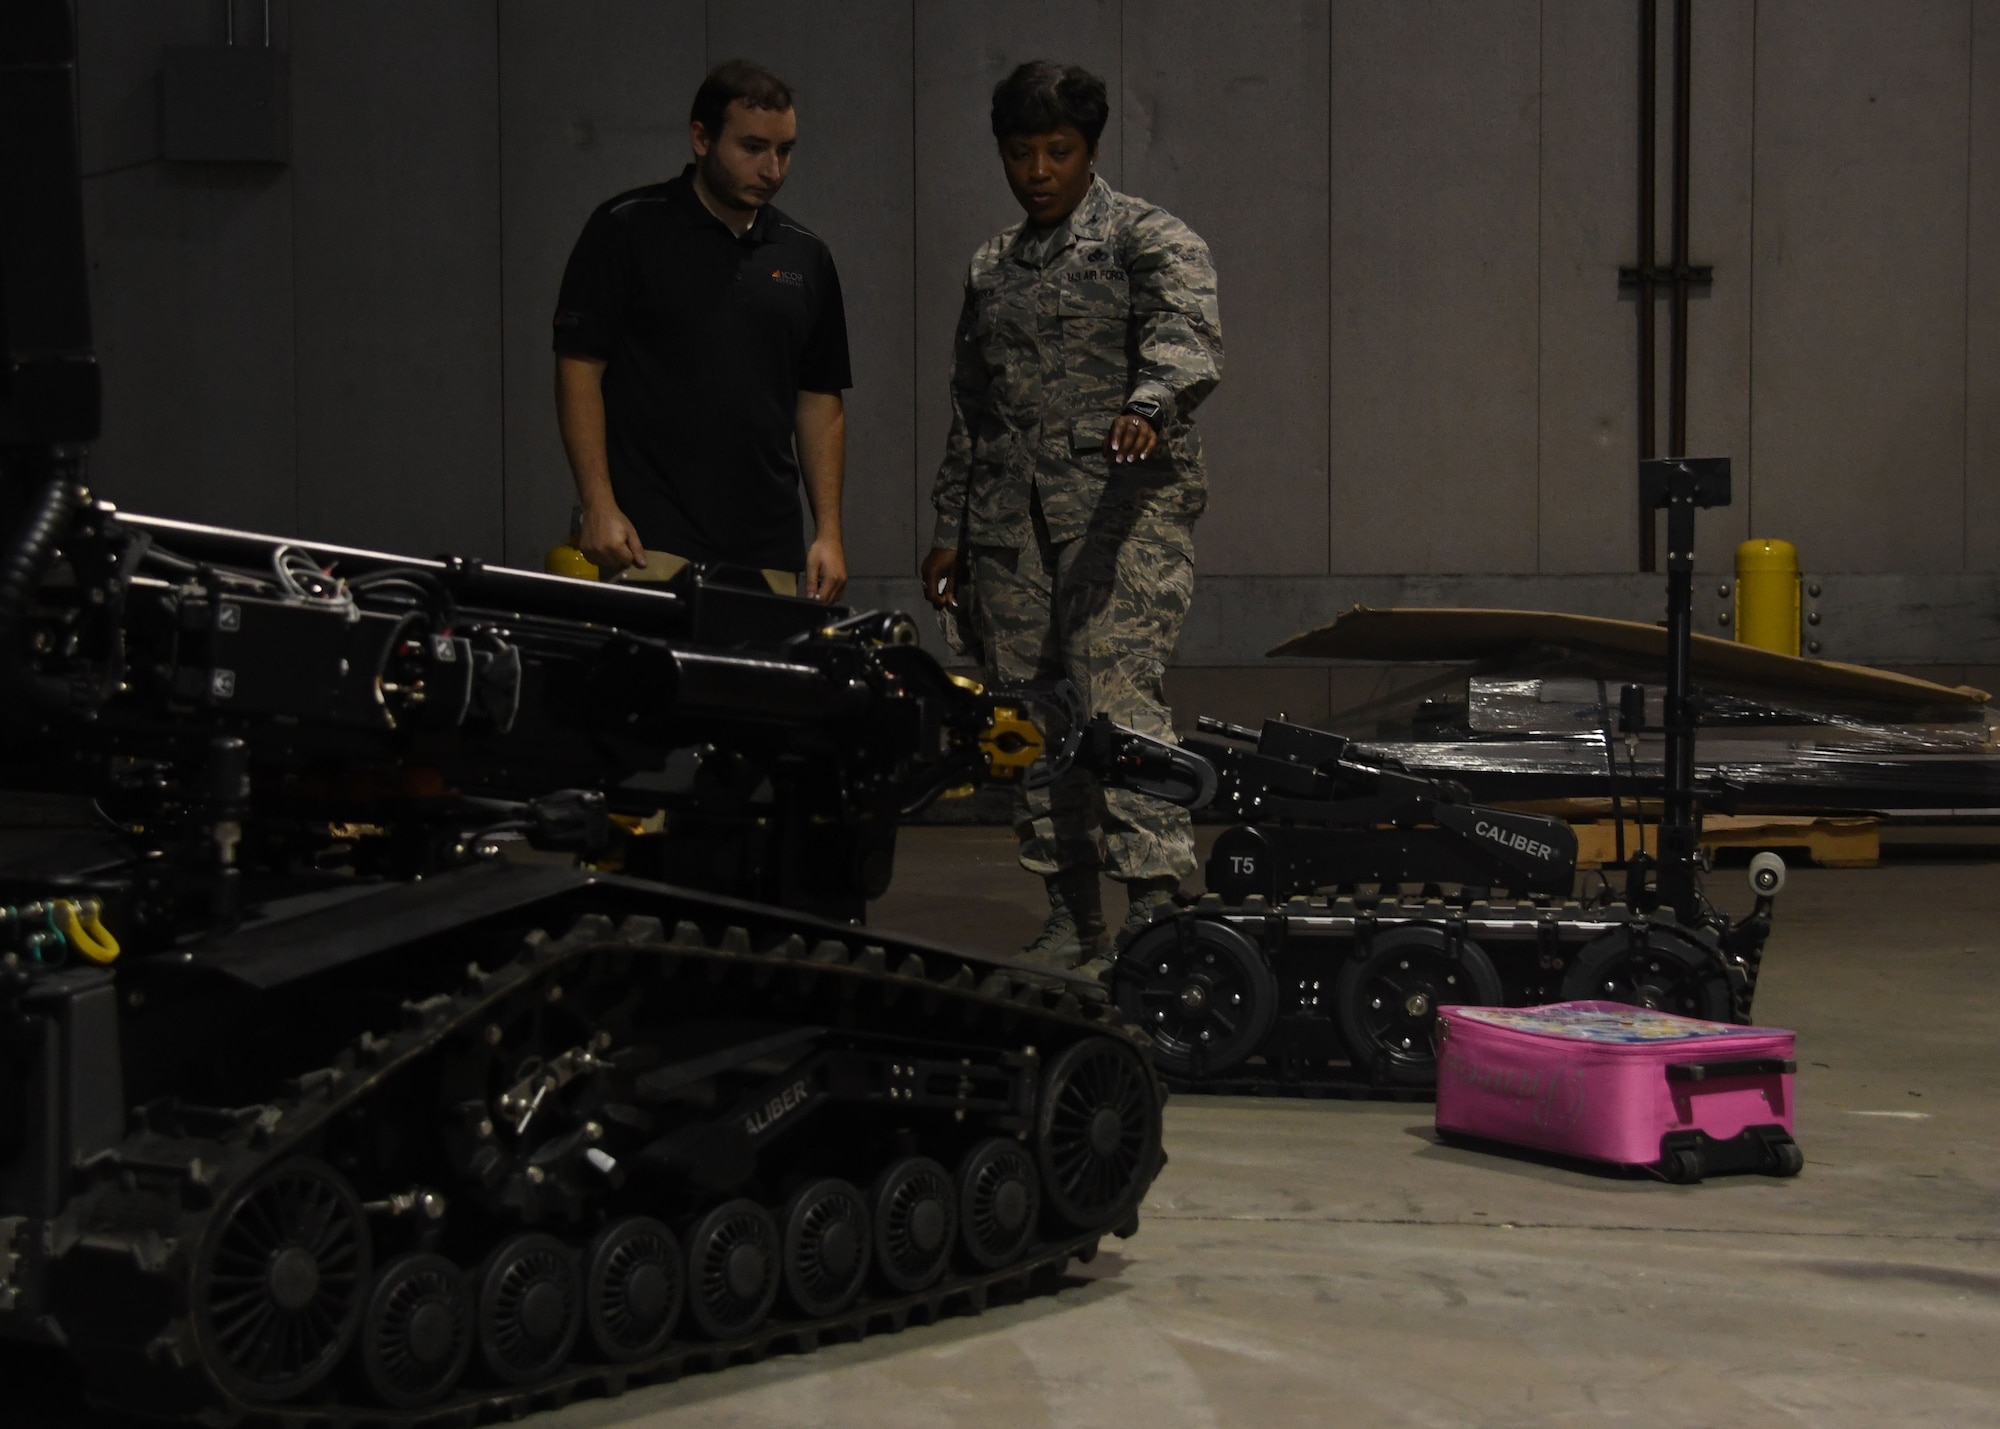 Col. Tanya Anderson, Air Force Civil Engineer Center Readiness Director at Tyndall Air Force Base, Fla., observes several explosive ordnance disposal robots at Dobbins Air Reserve Base, Ga, August 23, 2017. The robots were brought to Dobbins during an EOD Rodeo, and were used during several exercises between joint, community and coalition partners. (U.S. Air Force Photo/Staff Sgt. Miles Wilson)